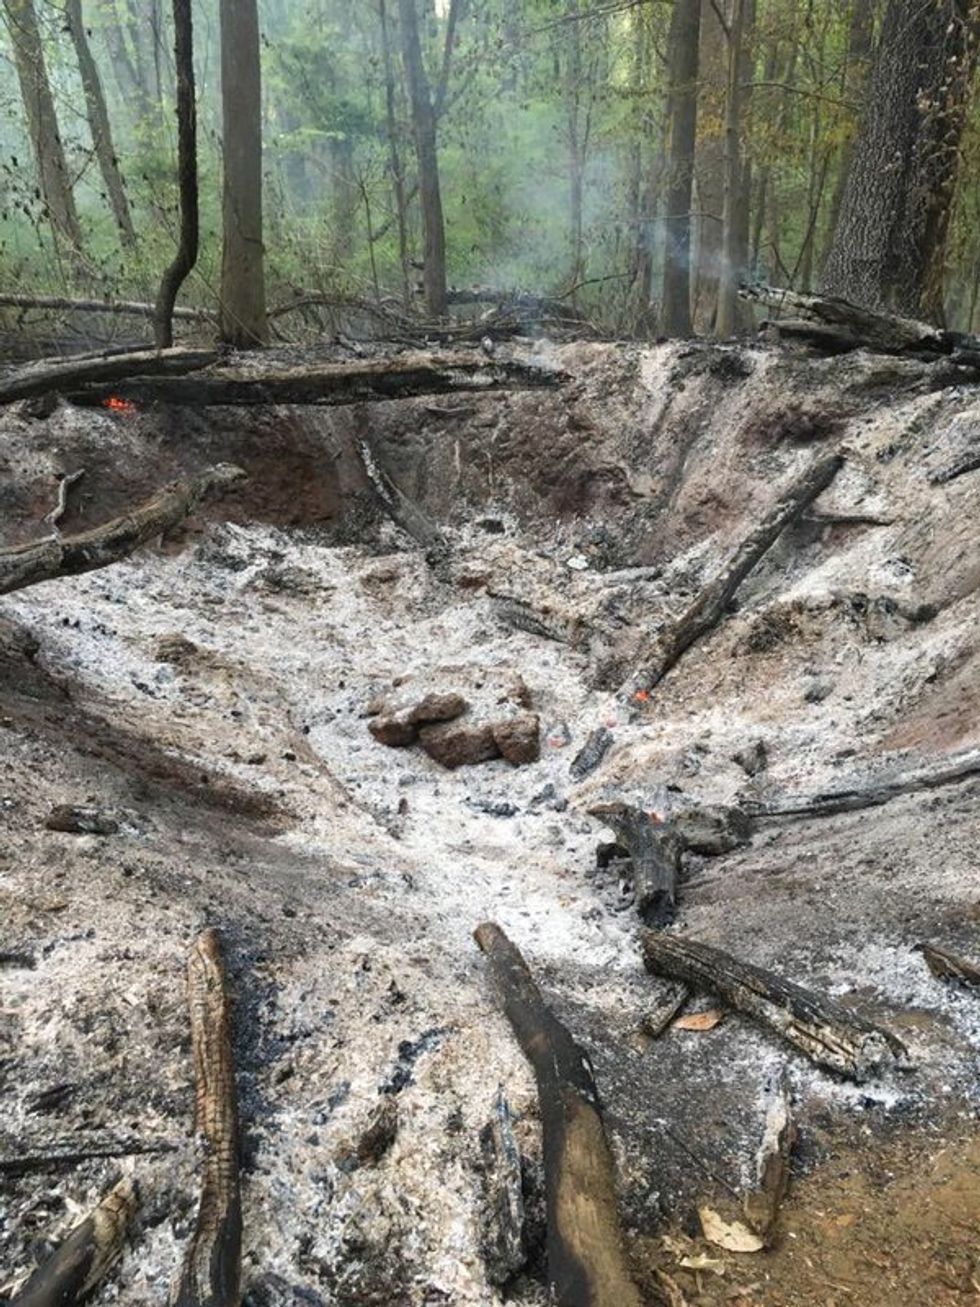 This Was Simply Not So': Maryland Fire Chief Apologizes For Tweet Claiming 'Possible Meteorite Strike' Caused Massive Brush Fire